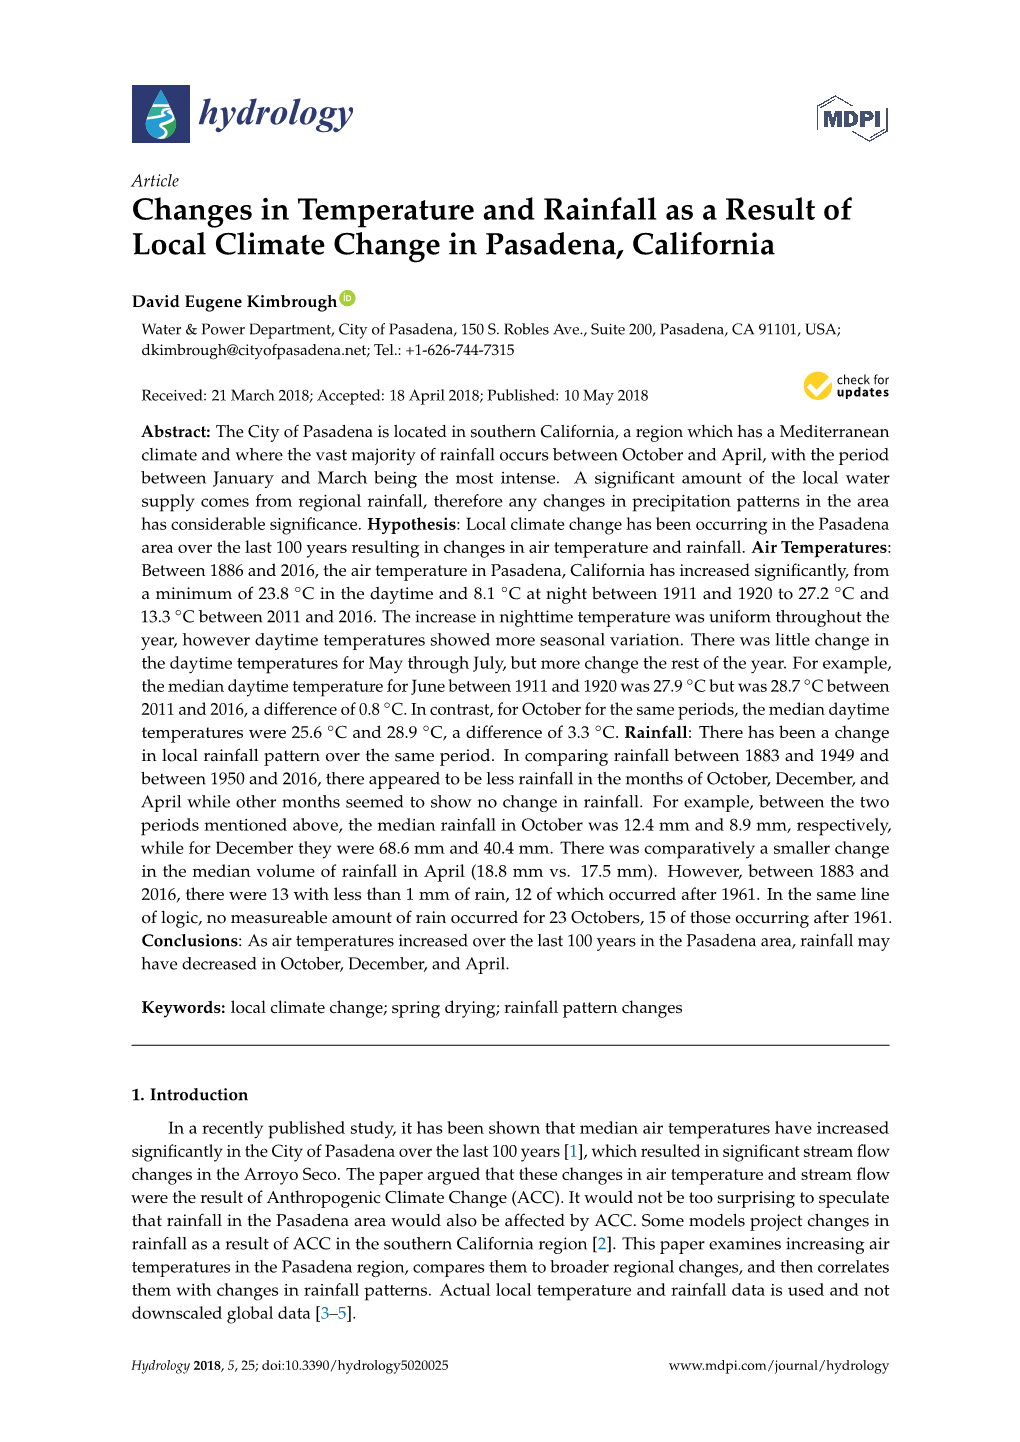 Changes in Temperature and Rainfall As a Result of Local Climate Change in Pasadena, California